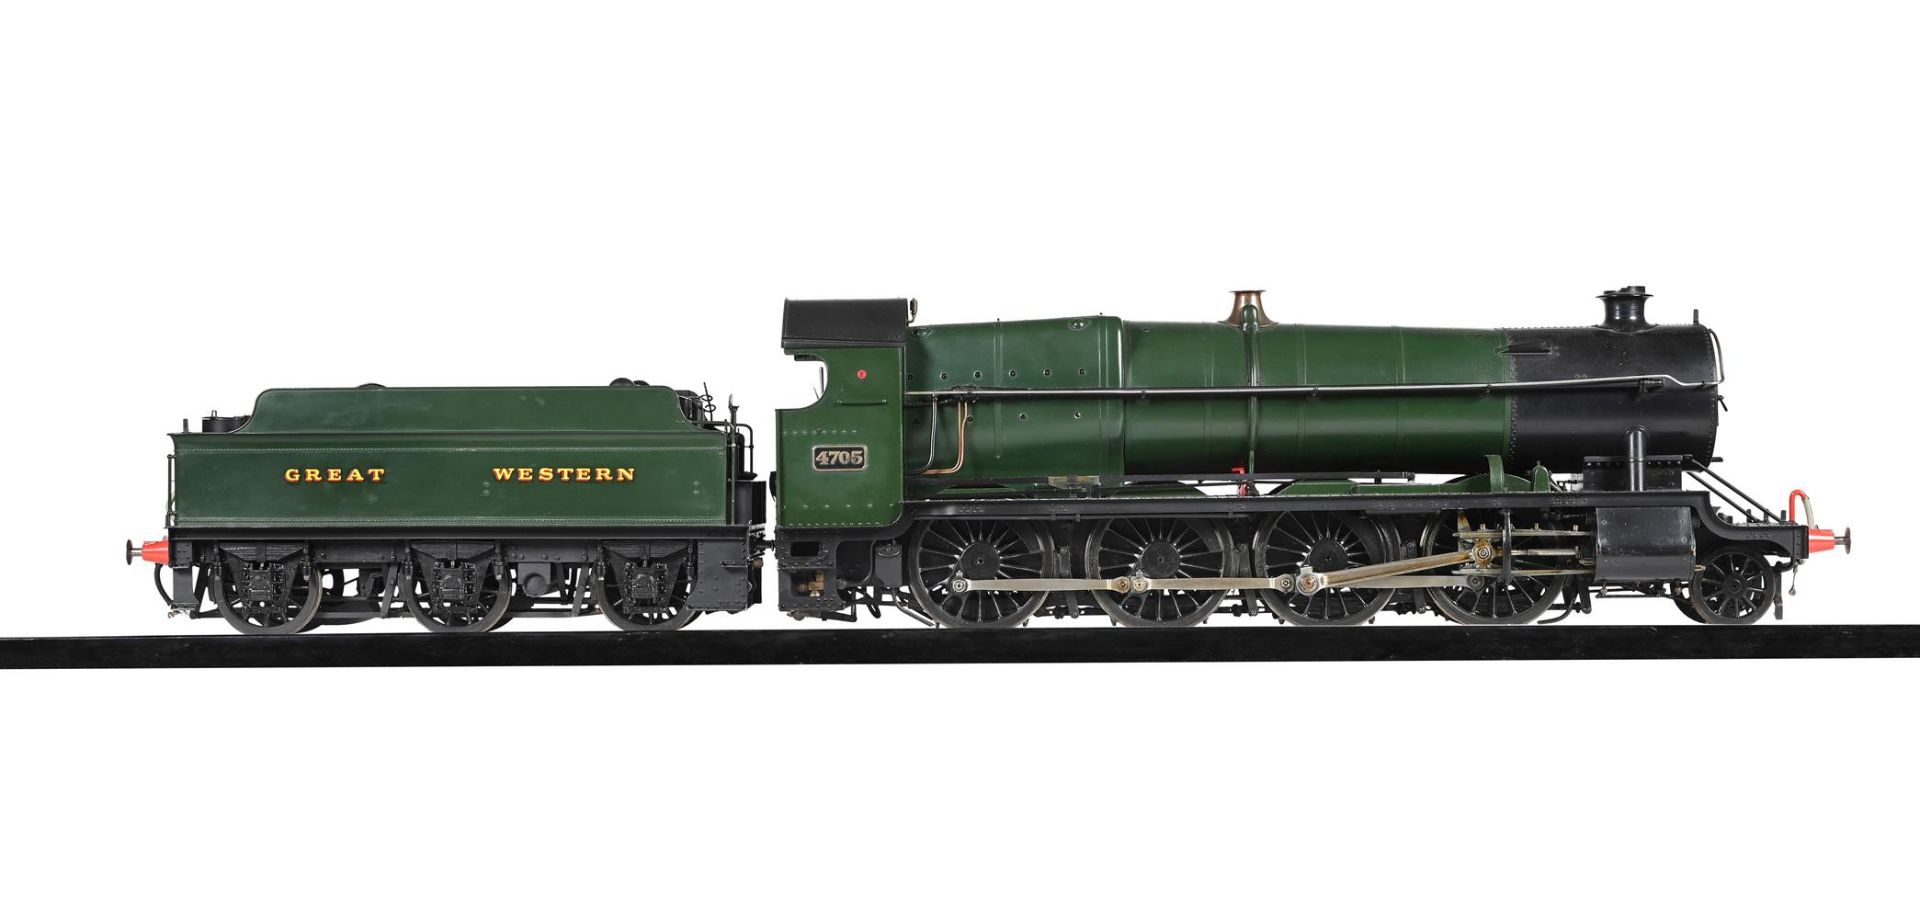 AN EXHIBITION STANDARD 3 1/2 INCH GWR MODEL OF A 2-8-0 GOODS TENDER LOCOMOTIVE NO 4705